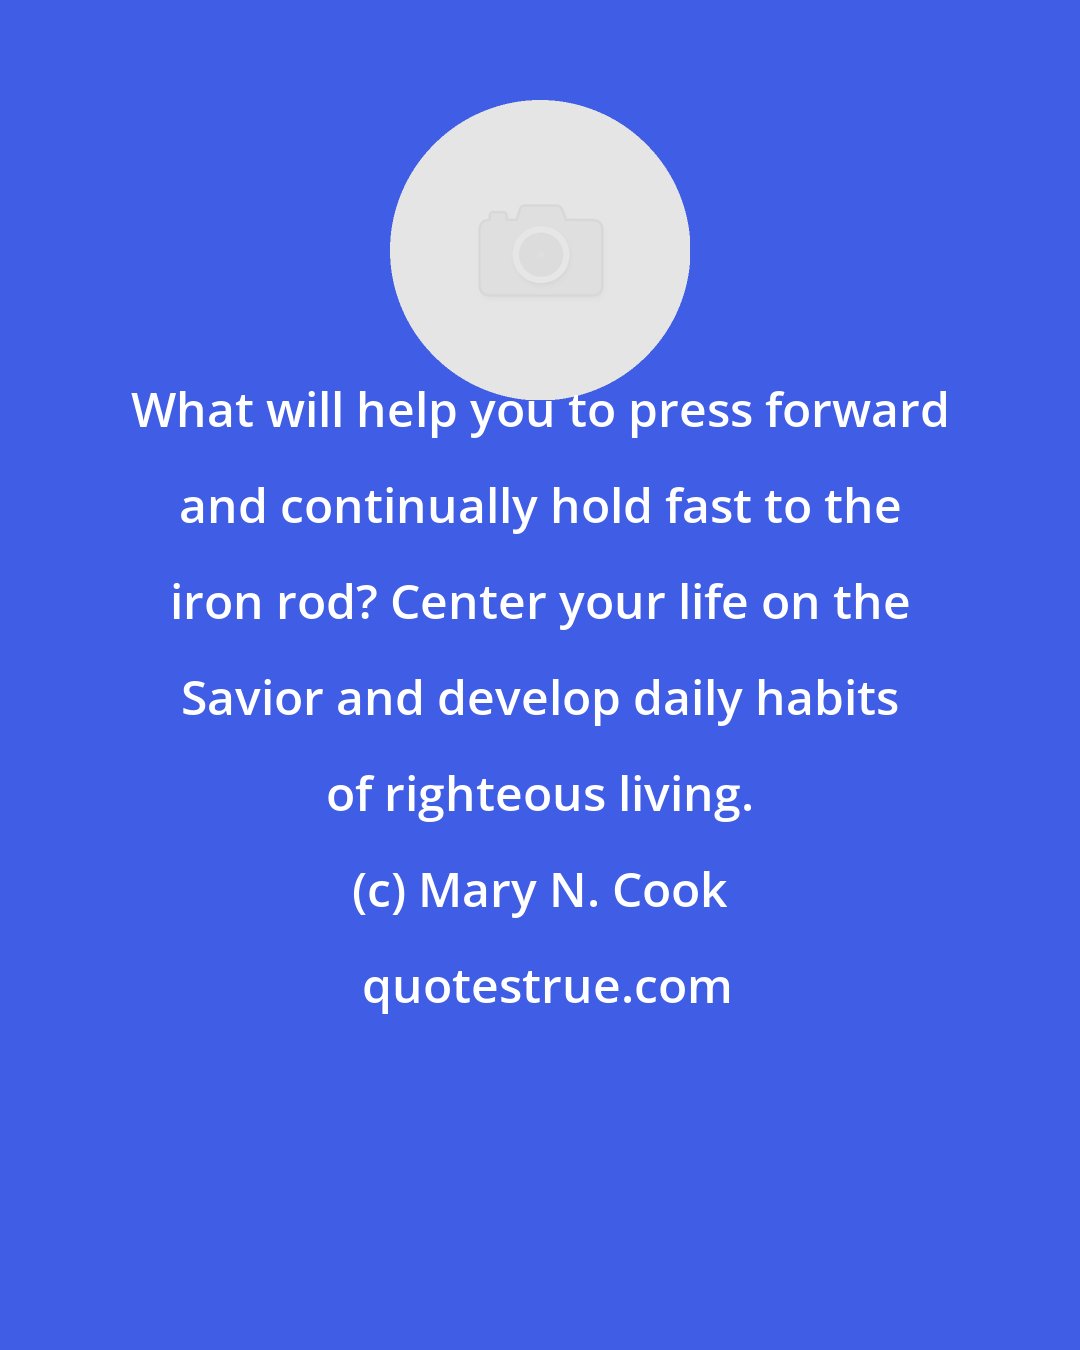 Mary N. Cook: What will help you to press forward and continually hold fast to the iron rod? Center your life on the Savior and develop daily habits of righteous living.